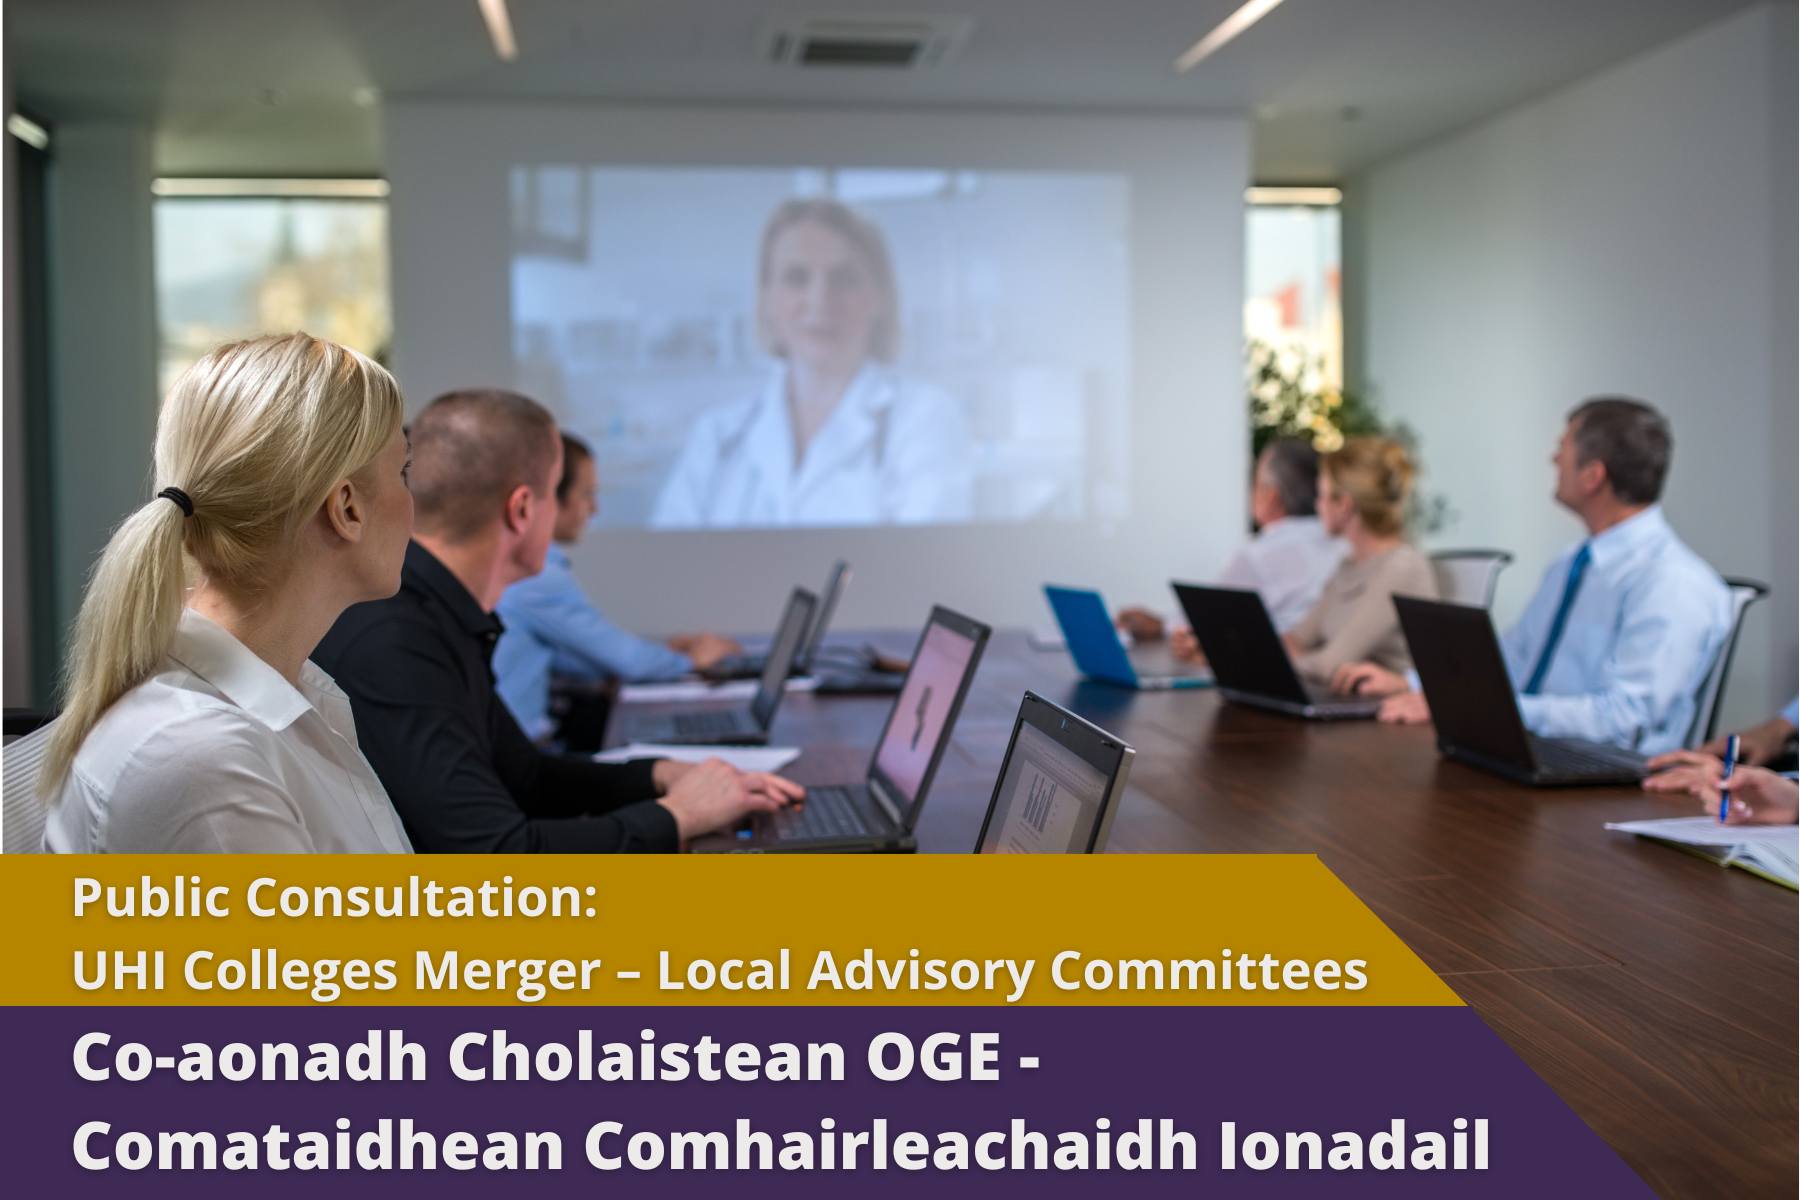 Picture: People in a business meeting room connecting to a video call. Text reads 'Public Consultation: UHI Colleges Merger - Local Advisory Committees